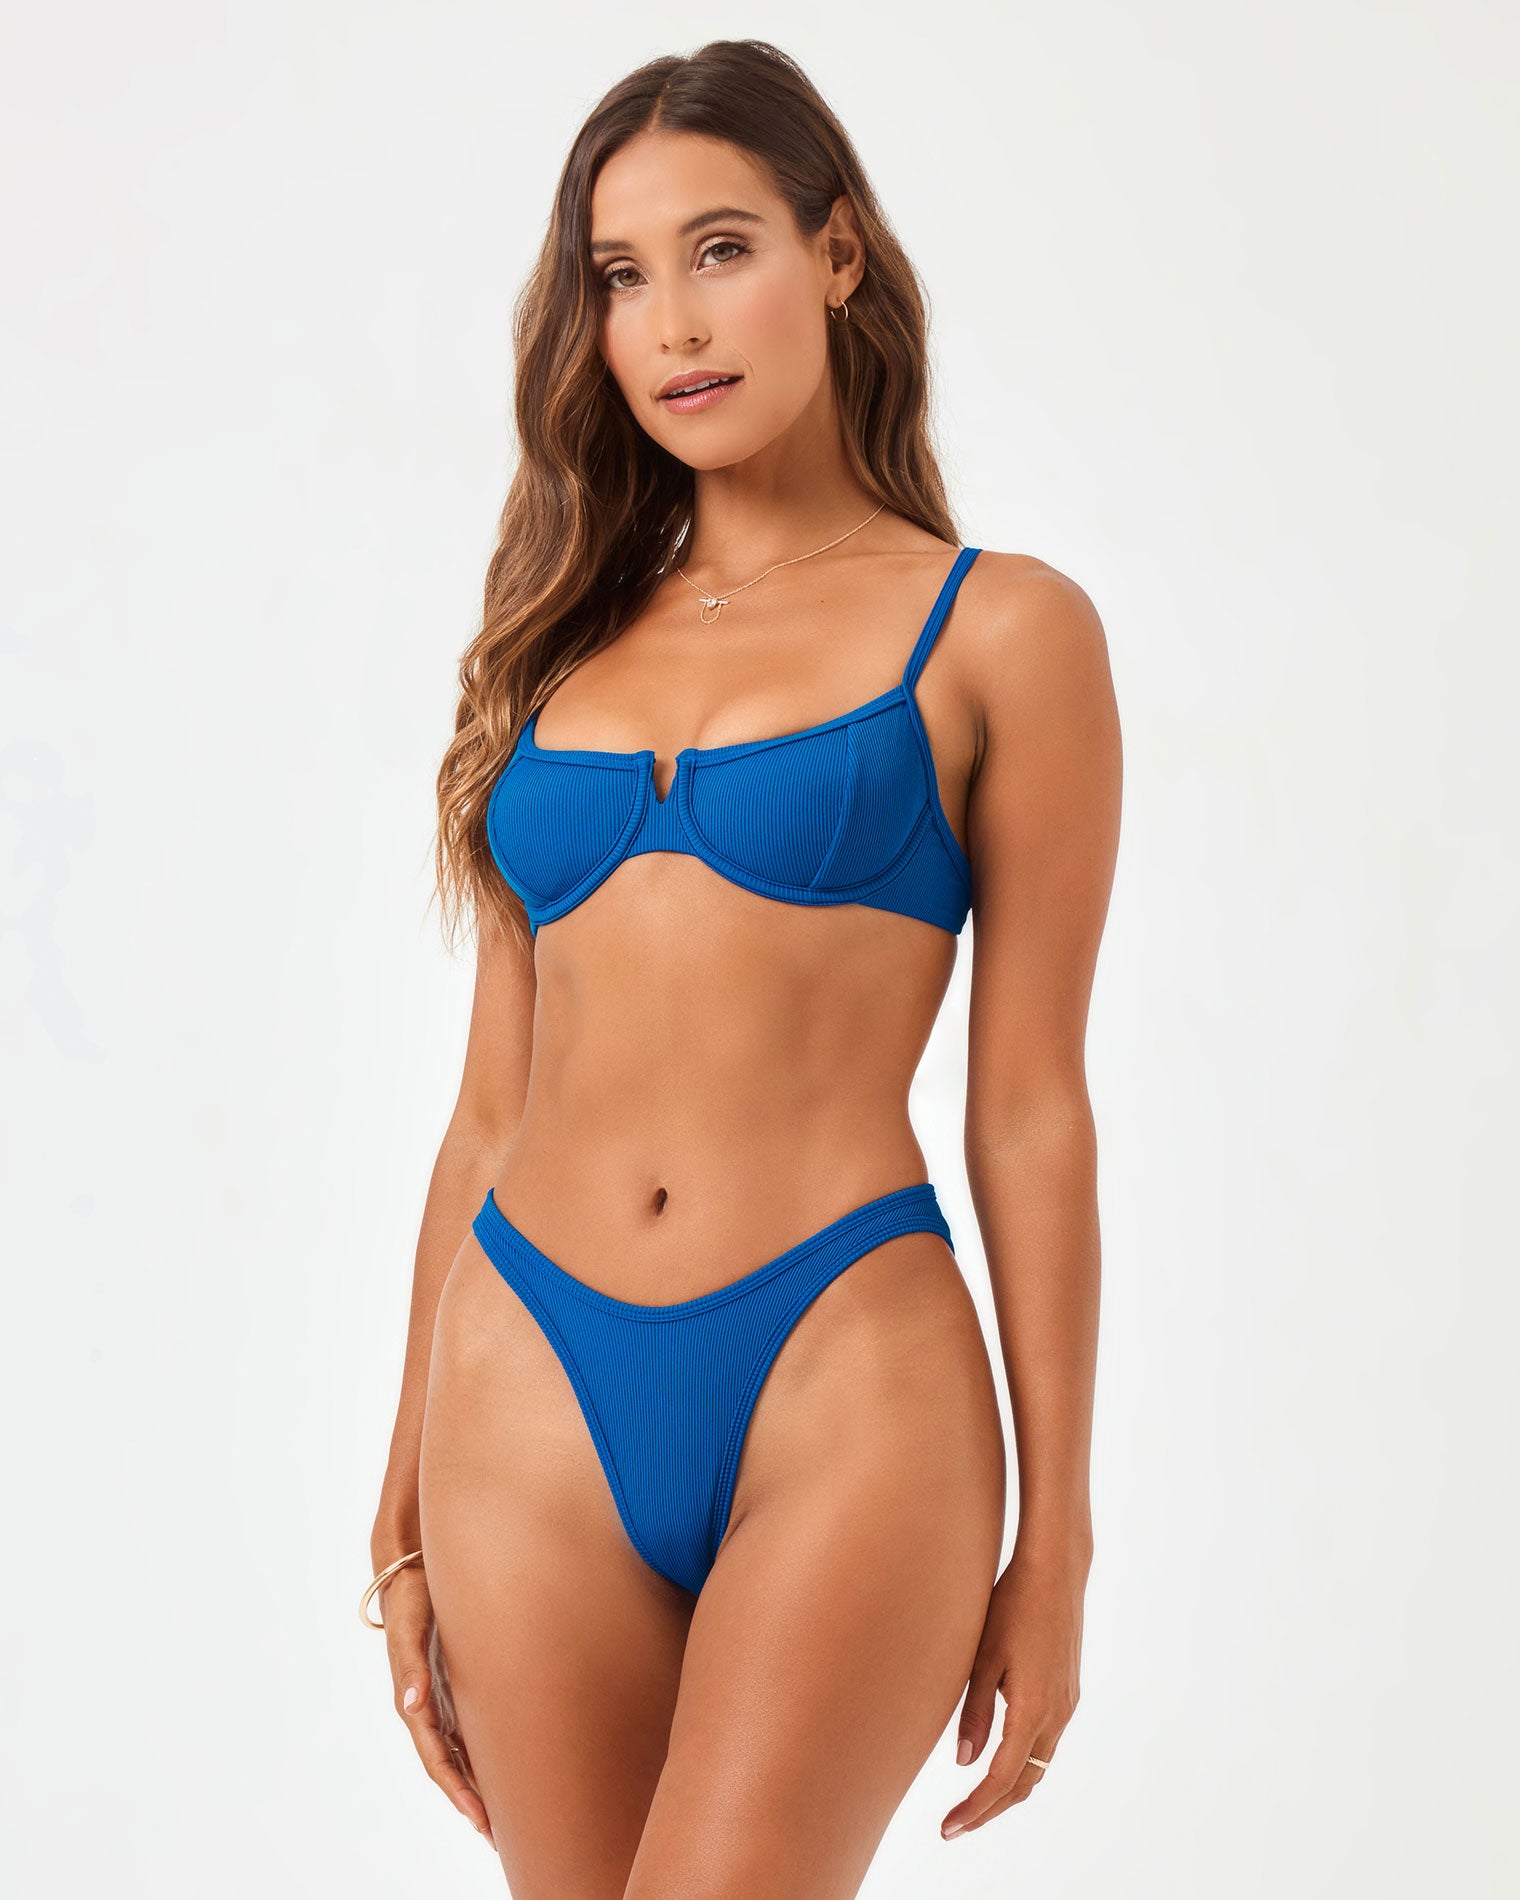 Ribbed Dominic Bikini Bottom - Abyss Abyss | Model: Anna (size: S)